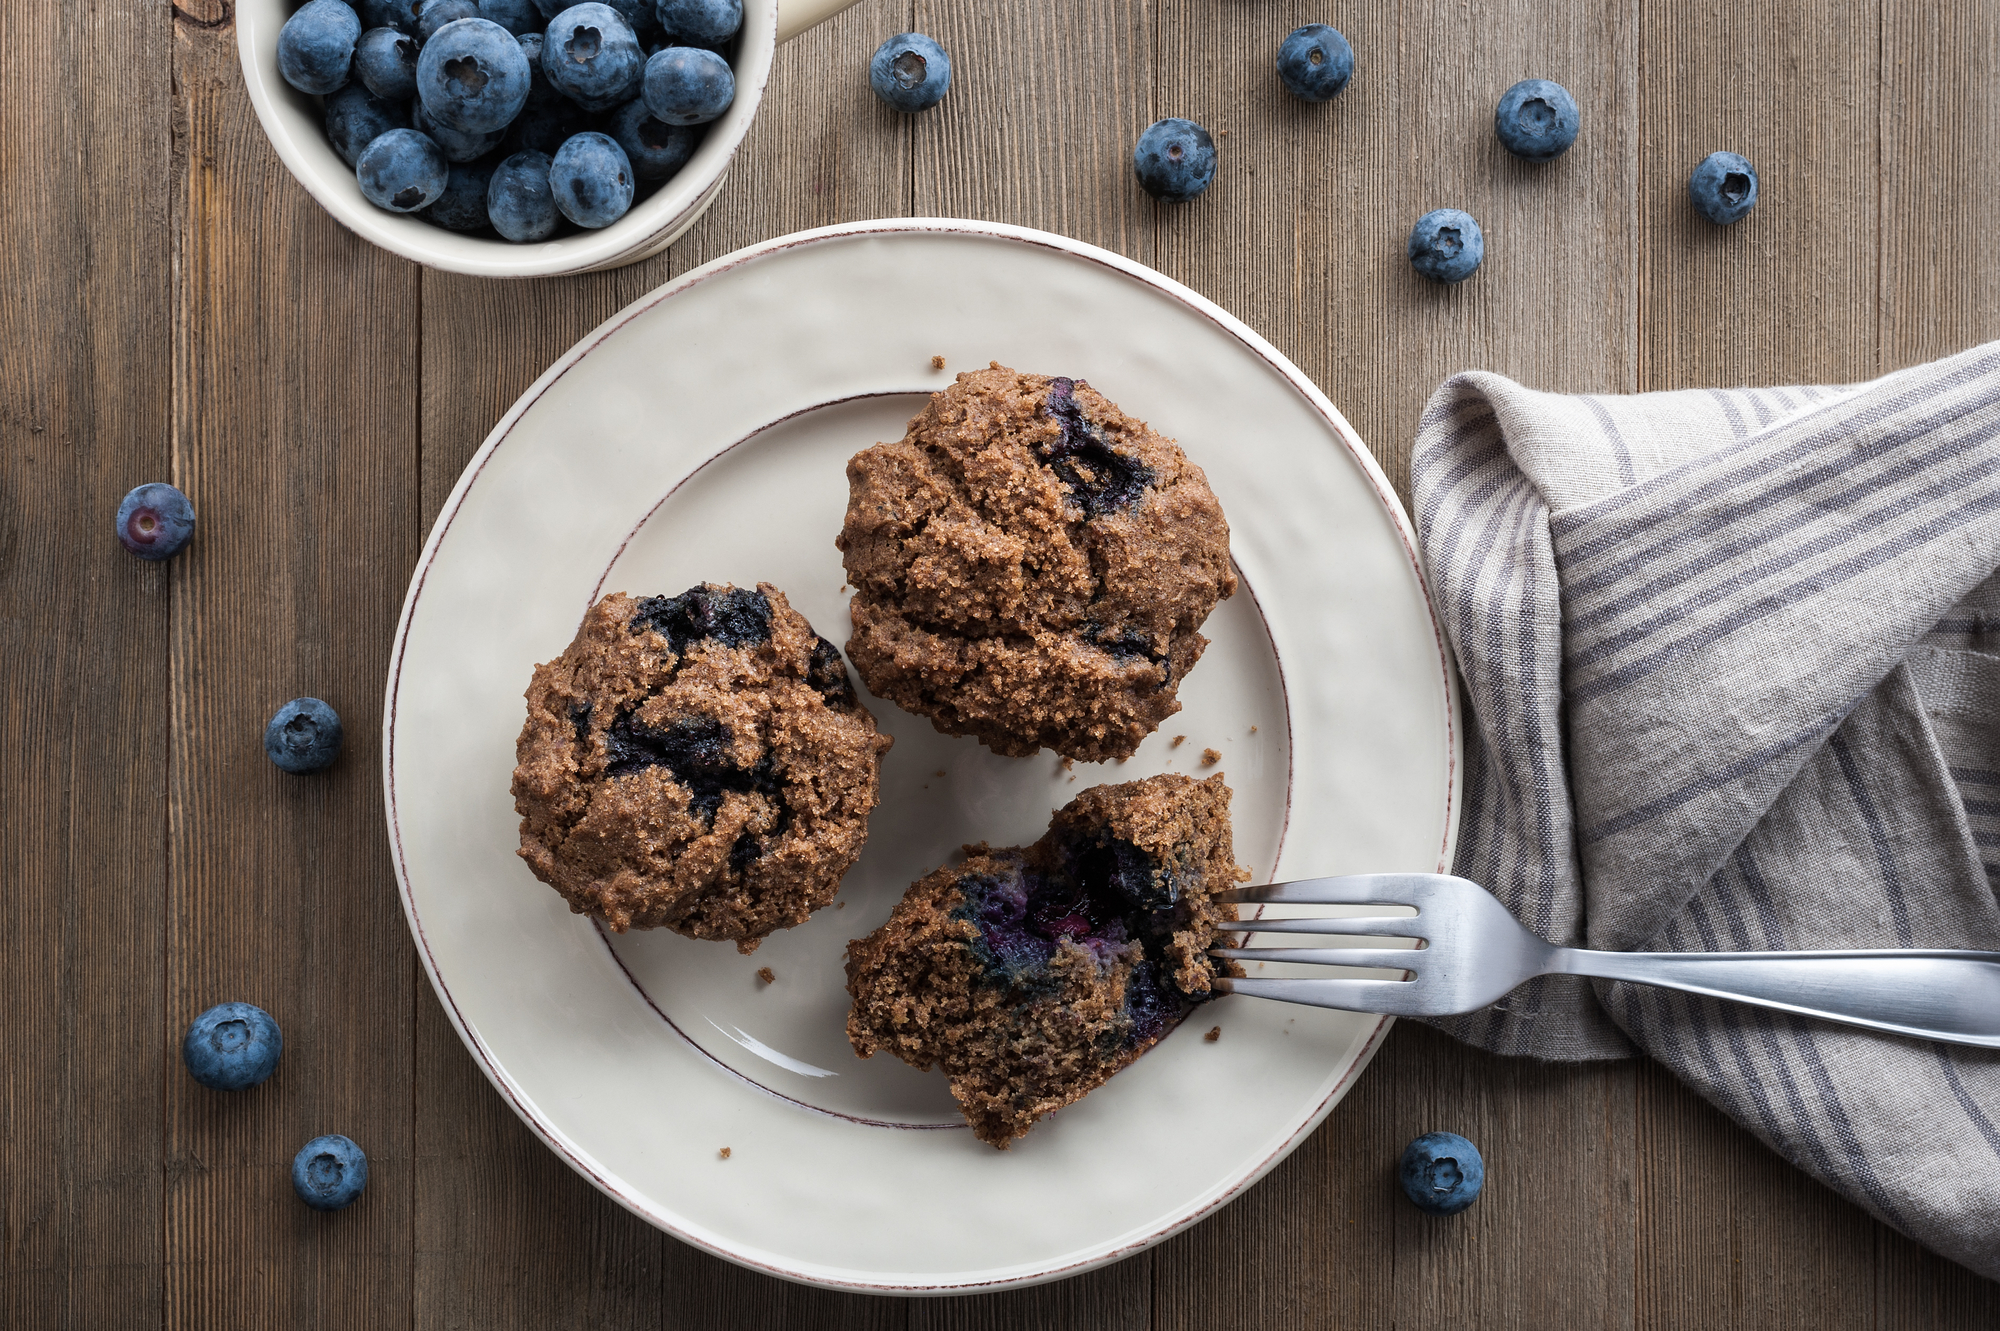 Red River cereal blueberry muffin on a plate with fork